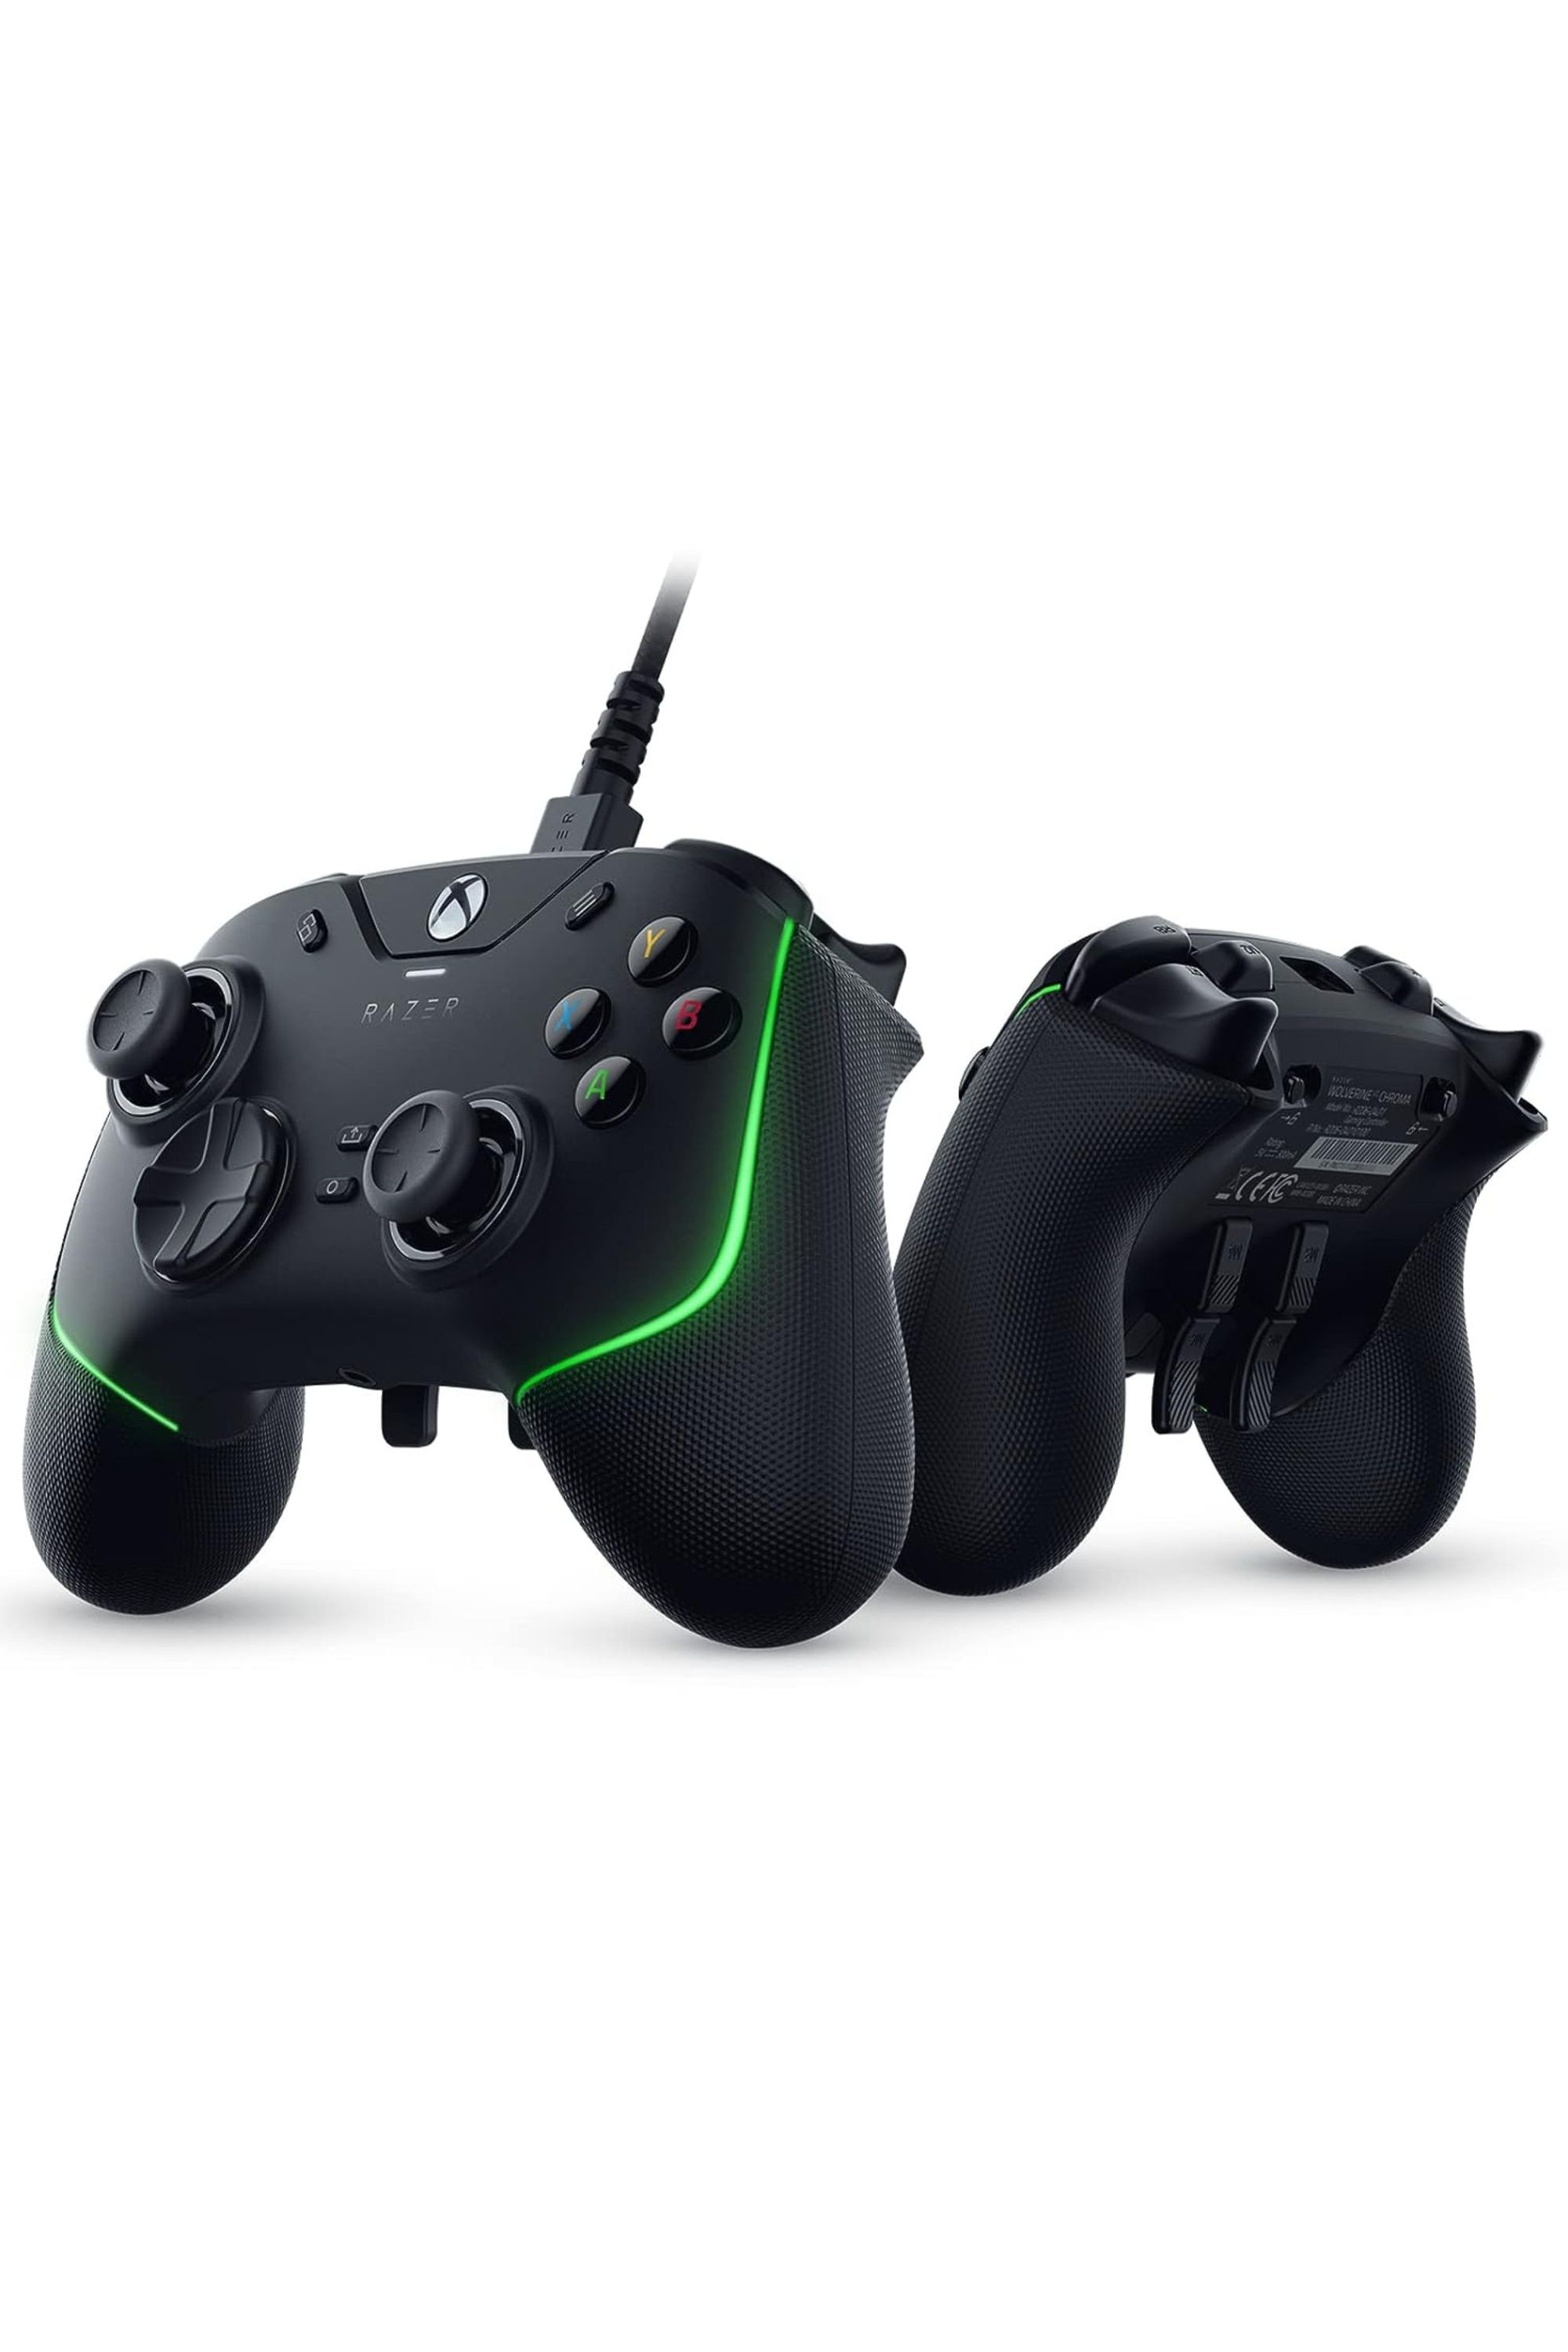 Razer Gaming Controllers - Ultimate Competitive Controllers